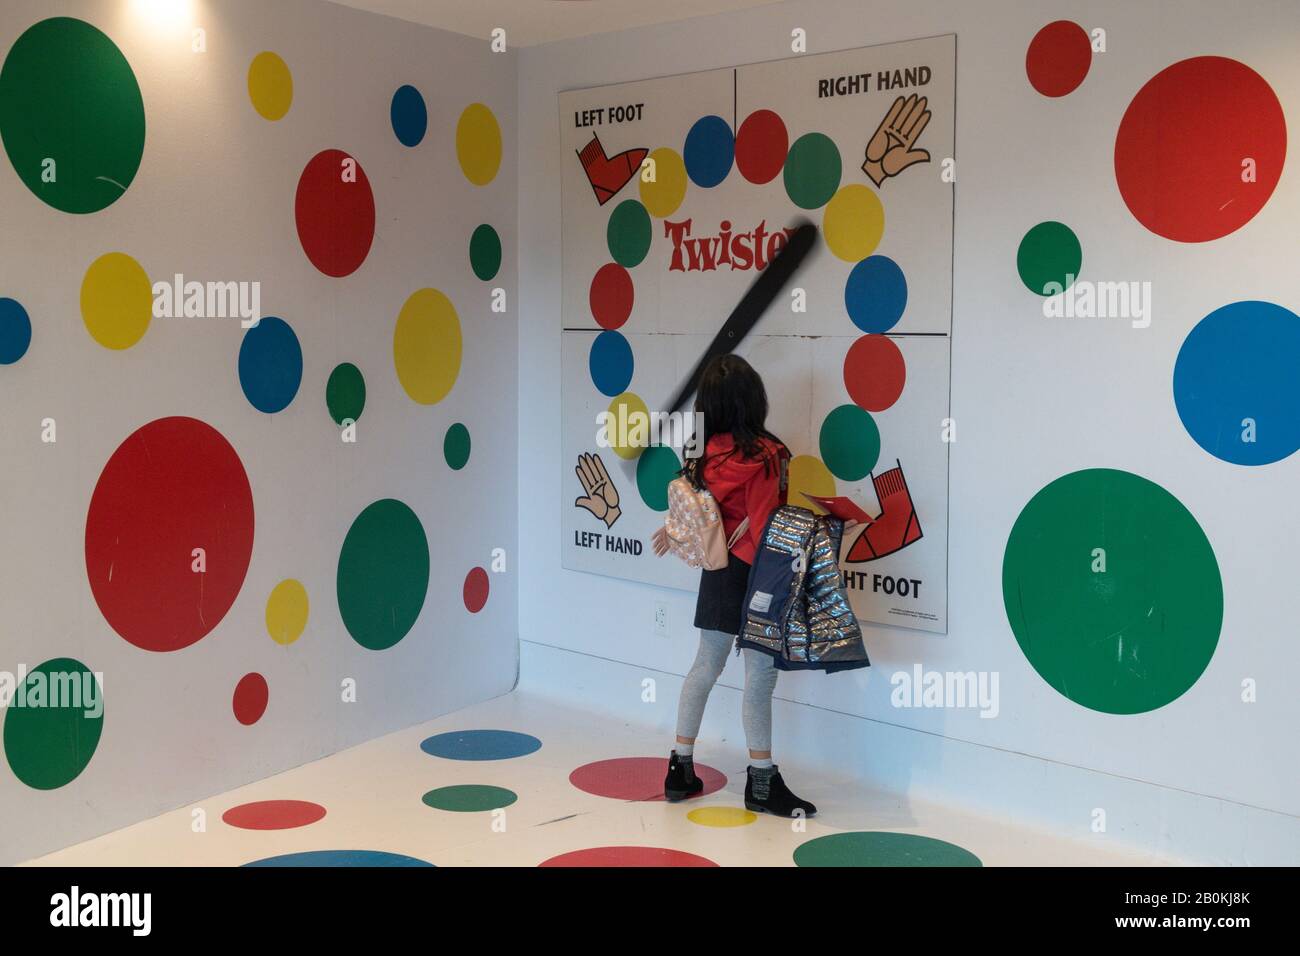 Young Girl Playing in the Giant Twister Game Setup nella Lobby del TWA Hotel , JFK, NYC, USA Foto Stock